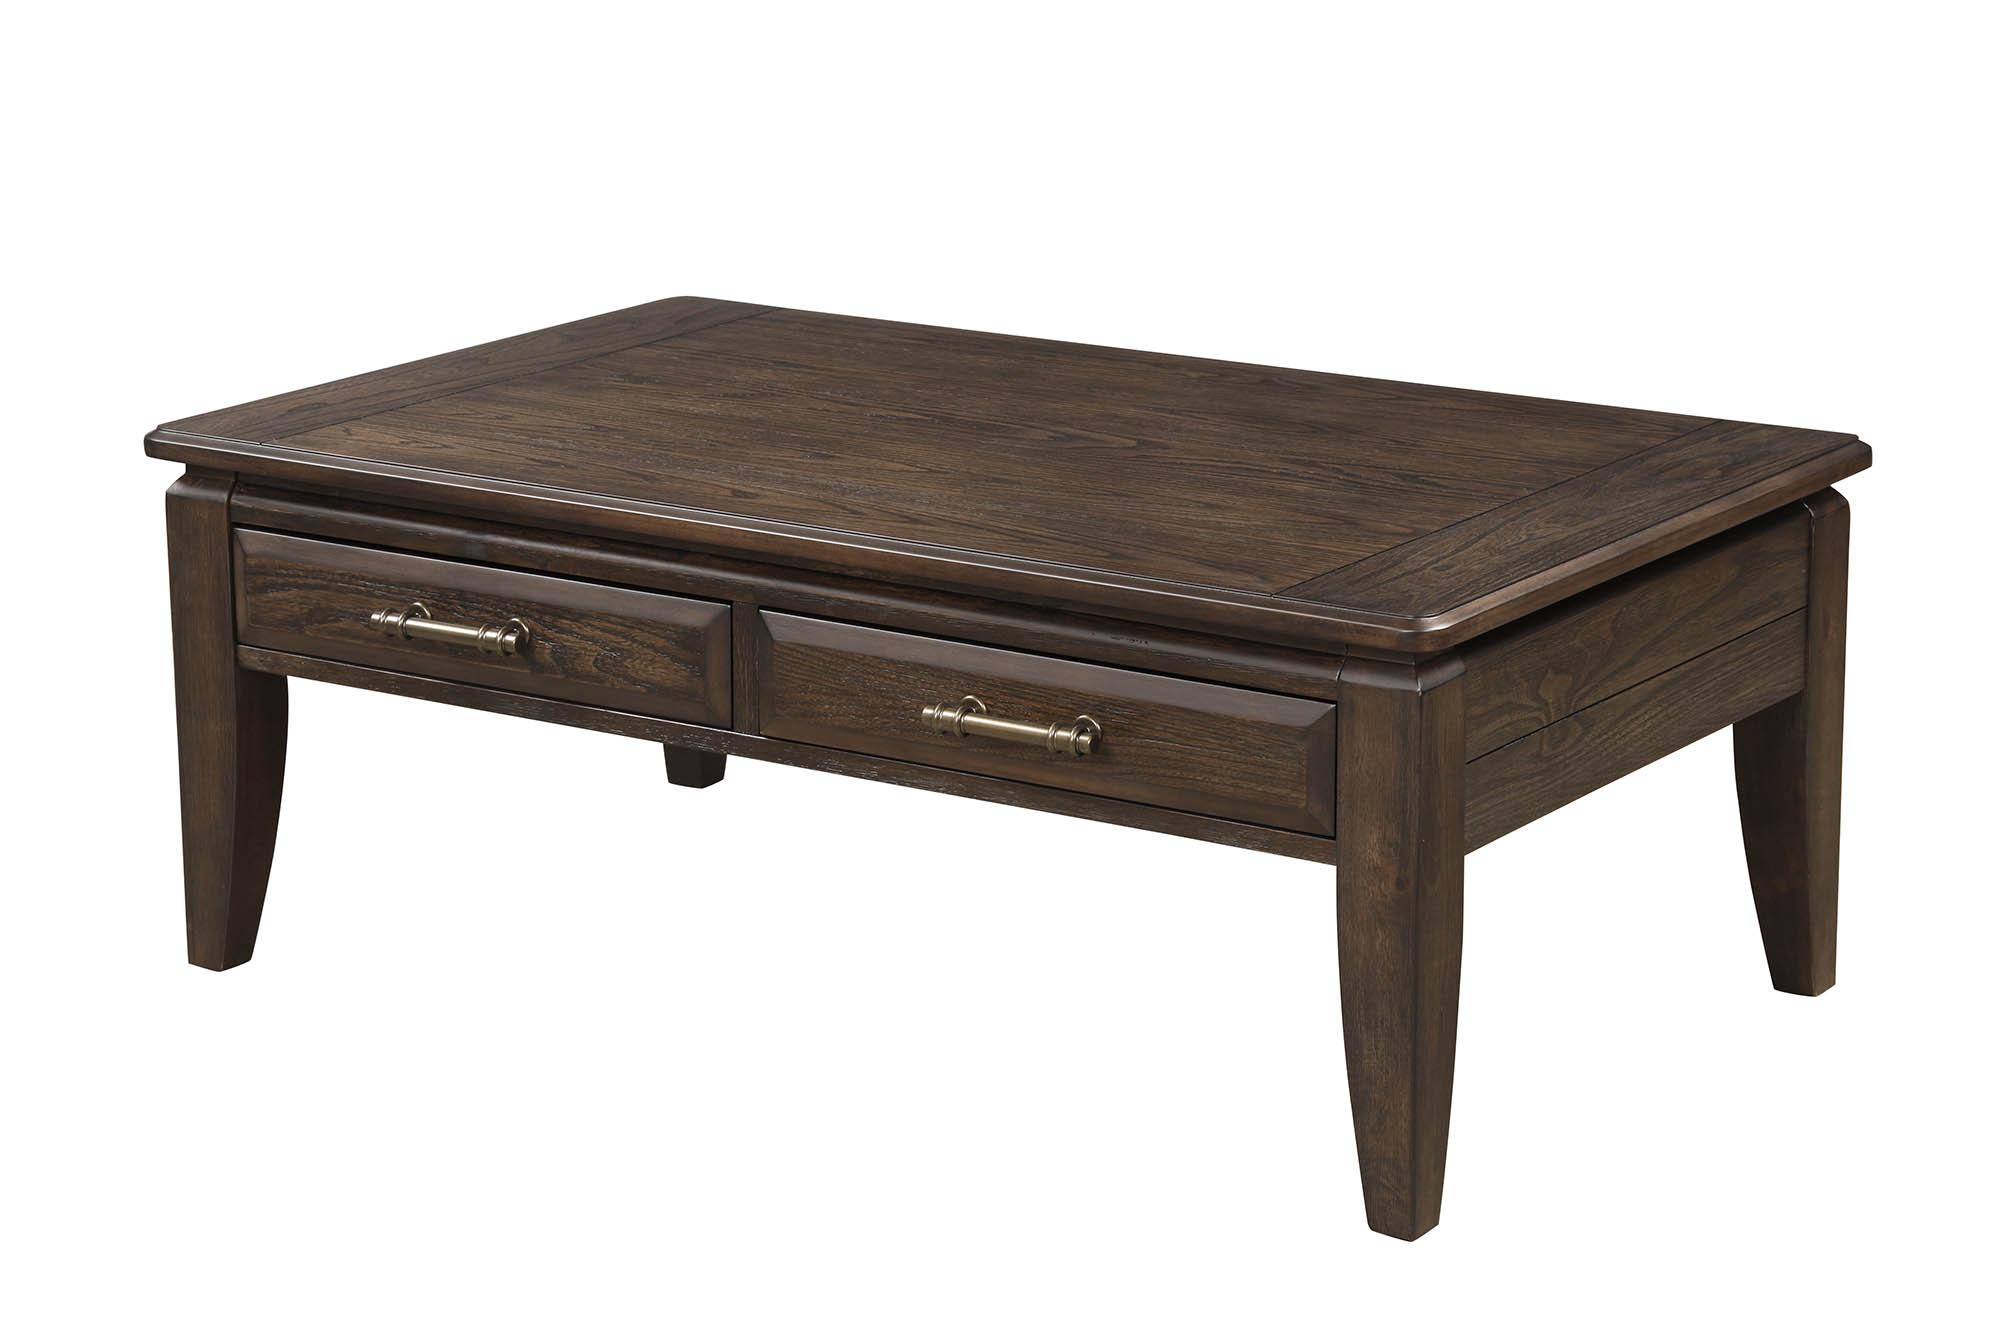 Modern, Traditional Coffee Table BELLAMY LANE 1921-001 1921-001 in Brown 